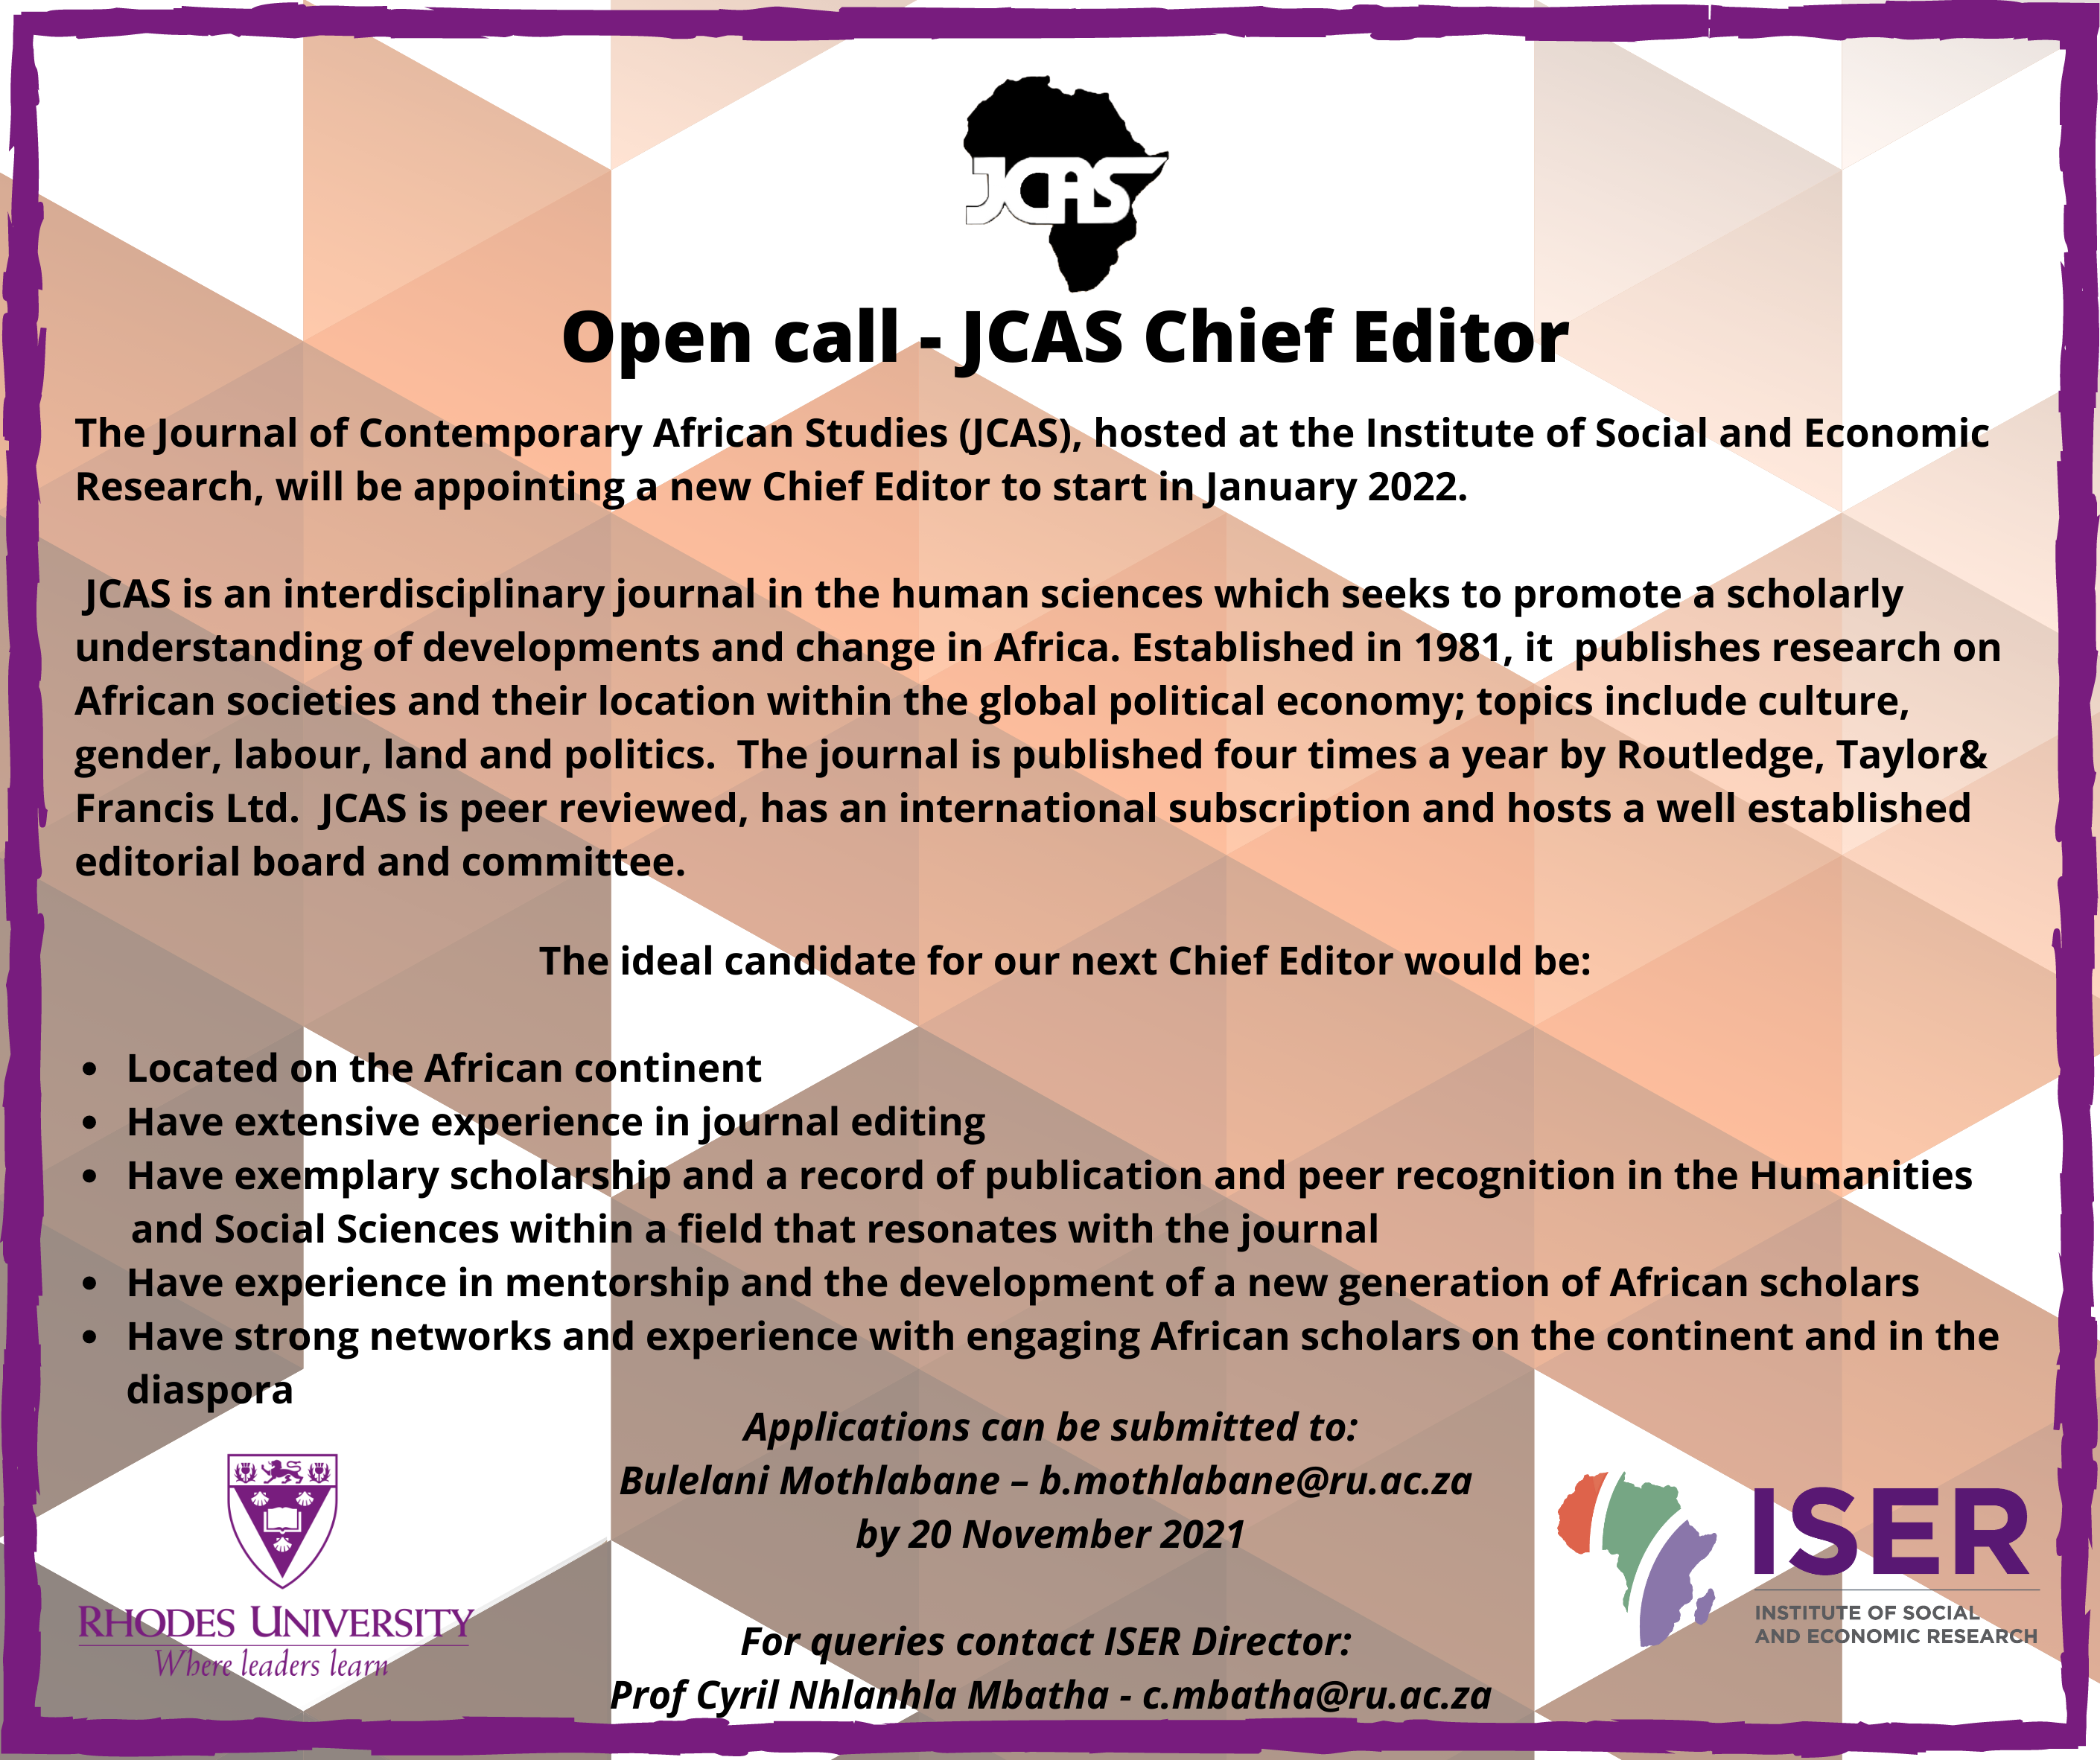 JCAS Open Call for Chief Editor 